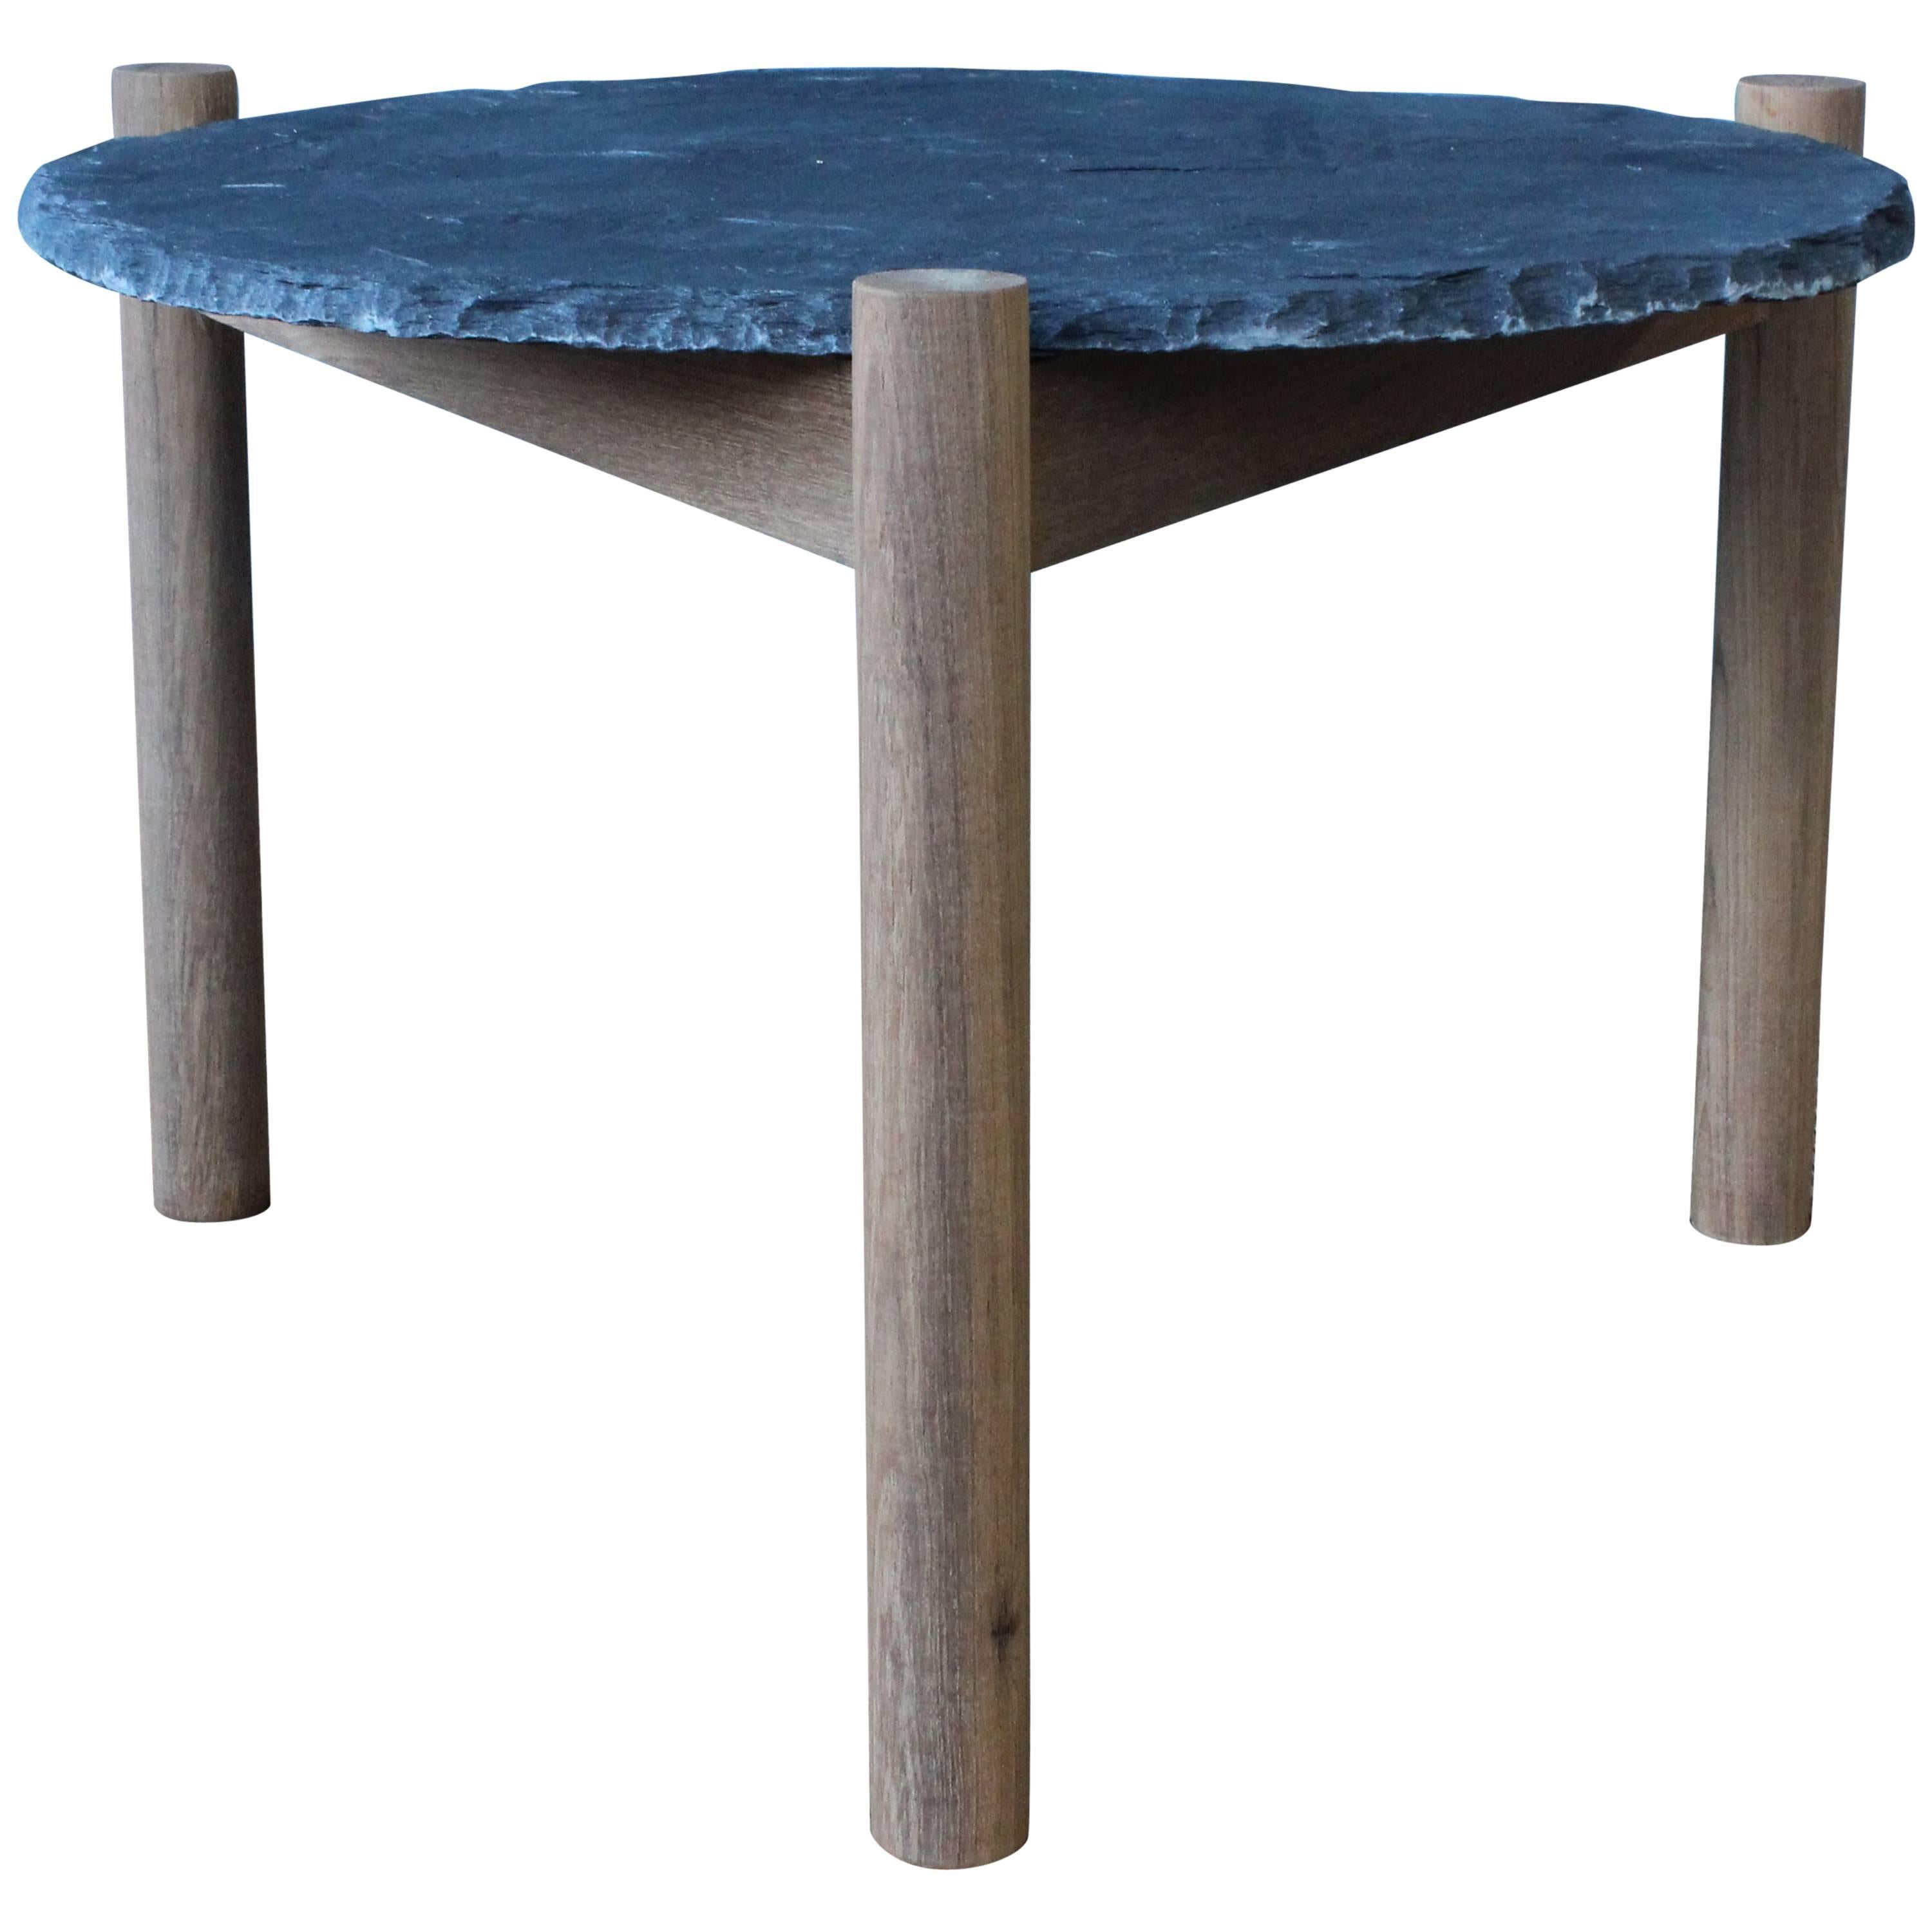 Slate Top Table with Teak Base, in the Style of Pierre Jeanneret